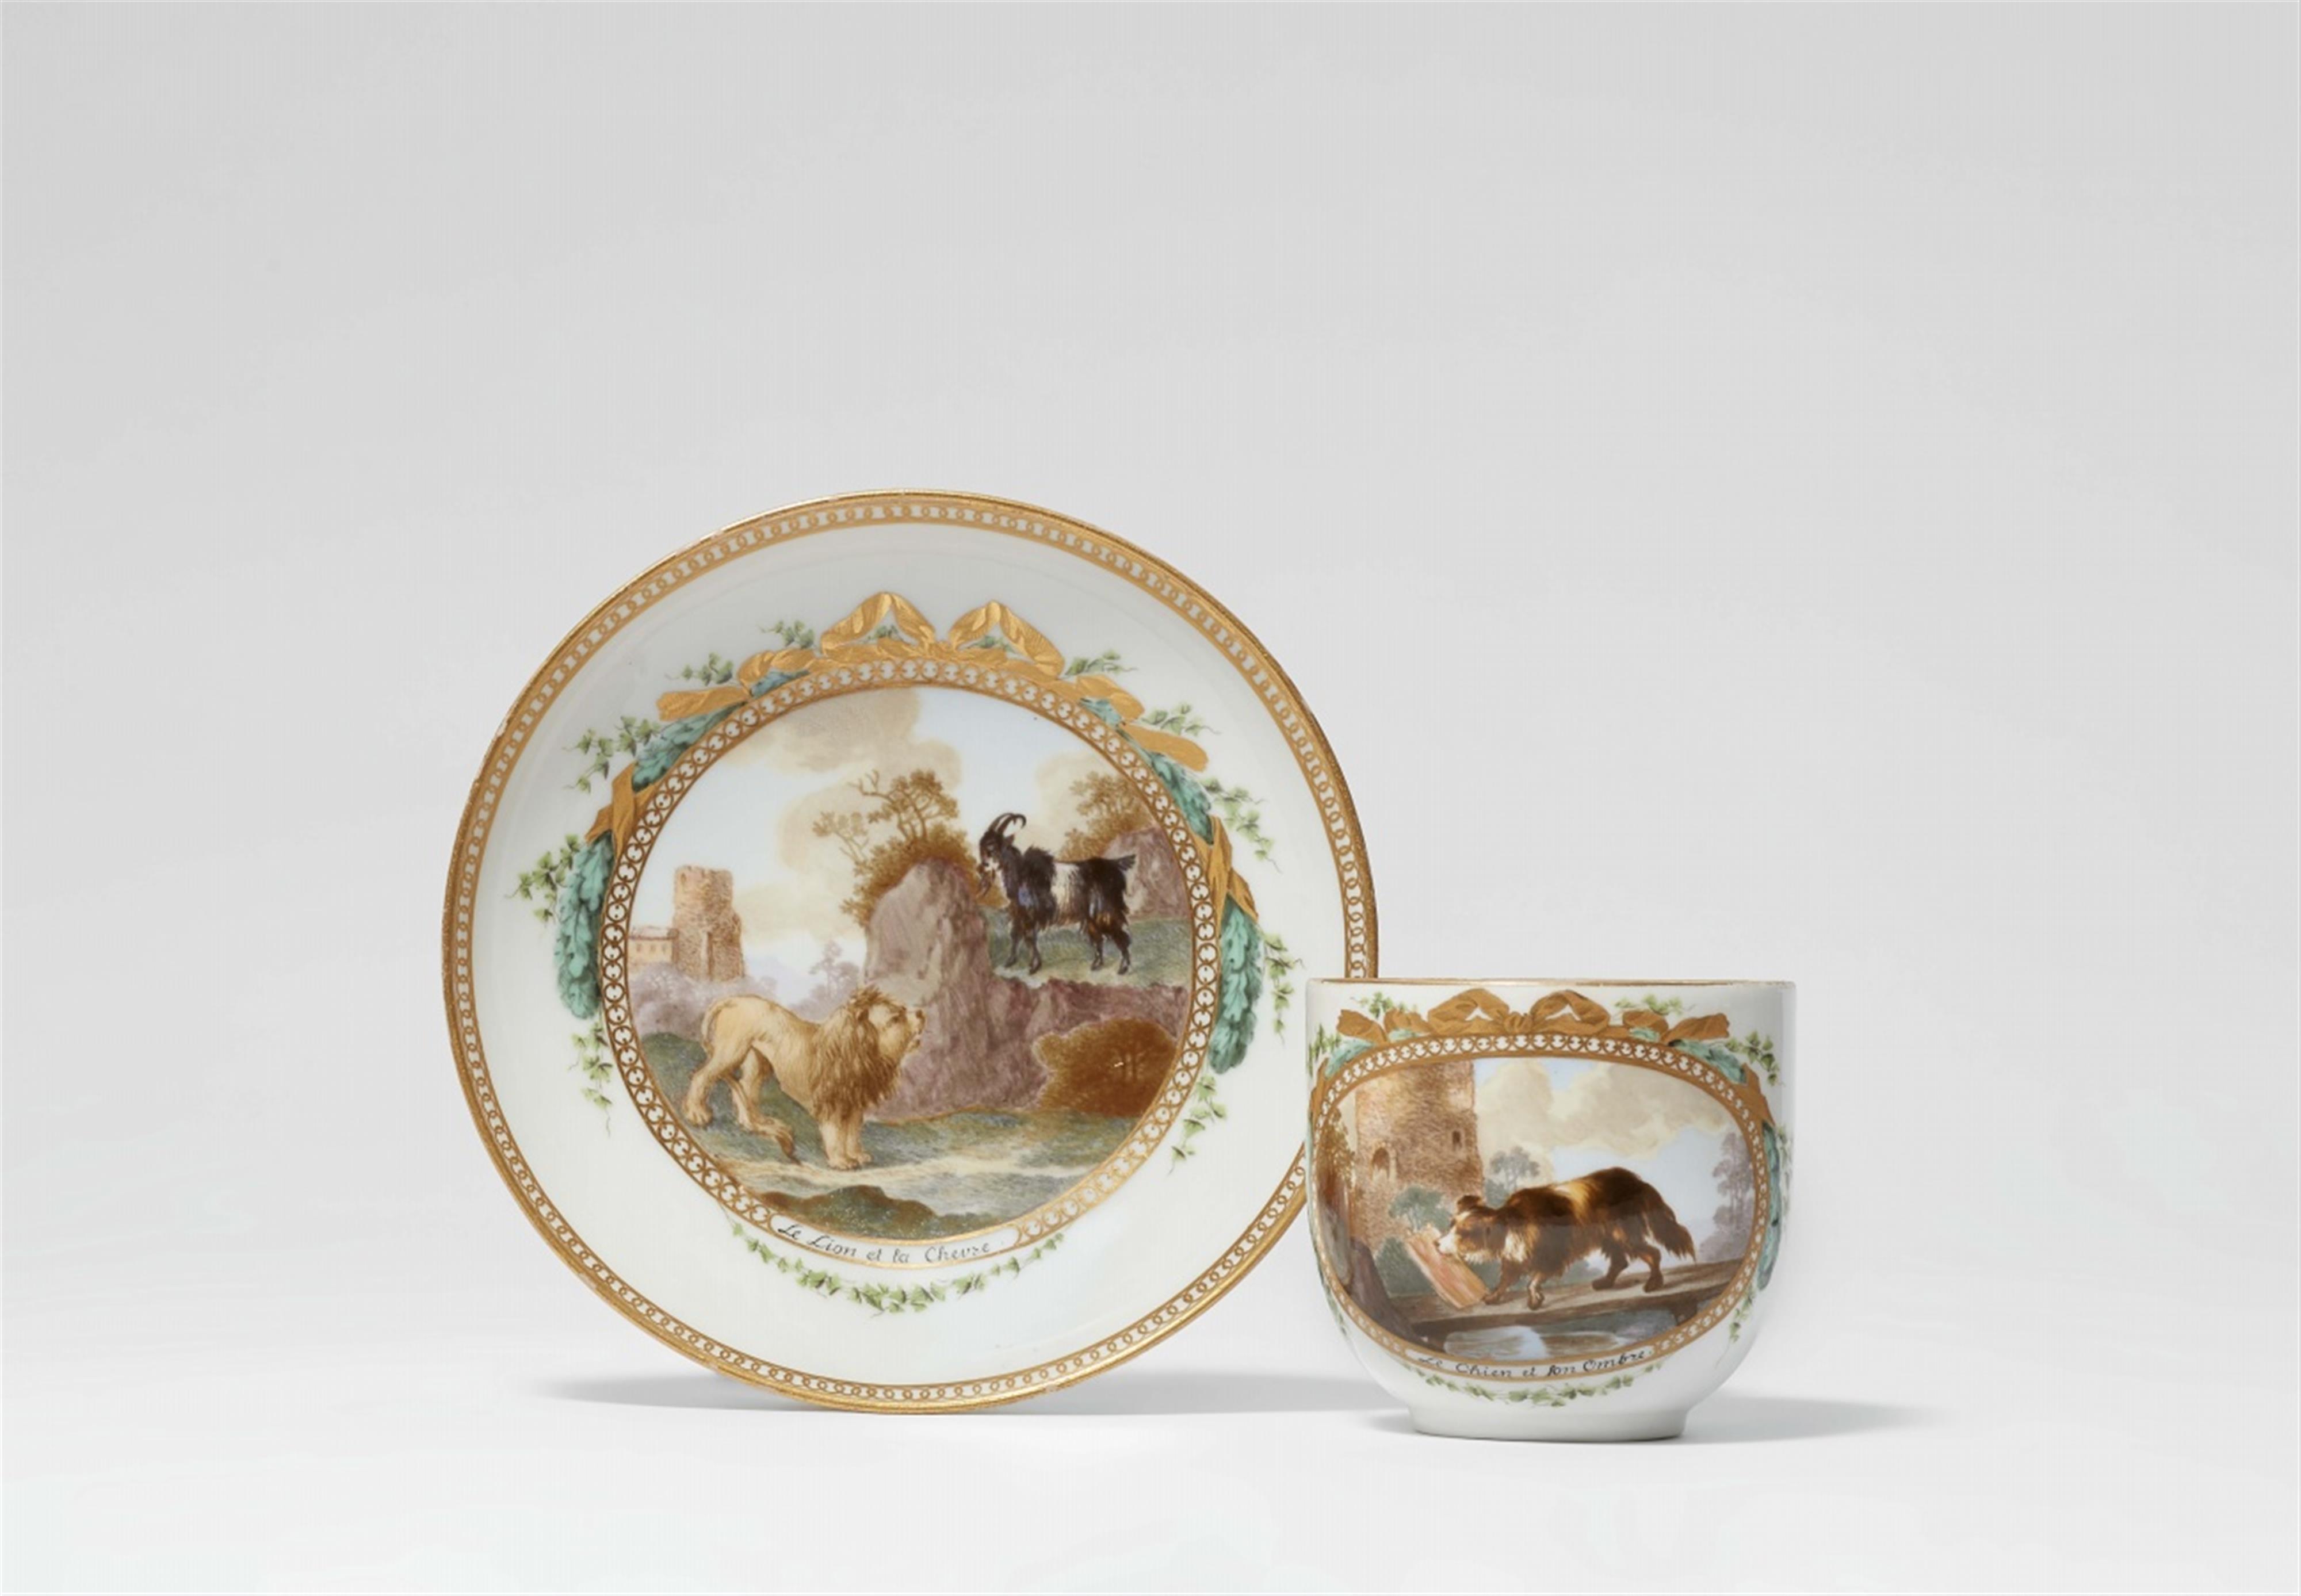 A Meissen porcelain cup and saucer with scenes from Aesop's fables - image-1